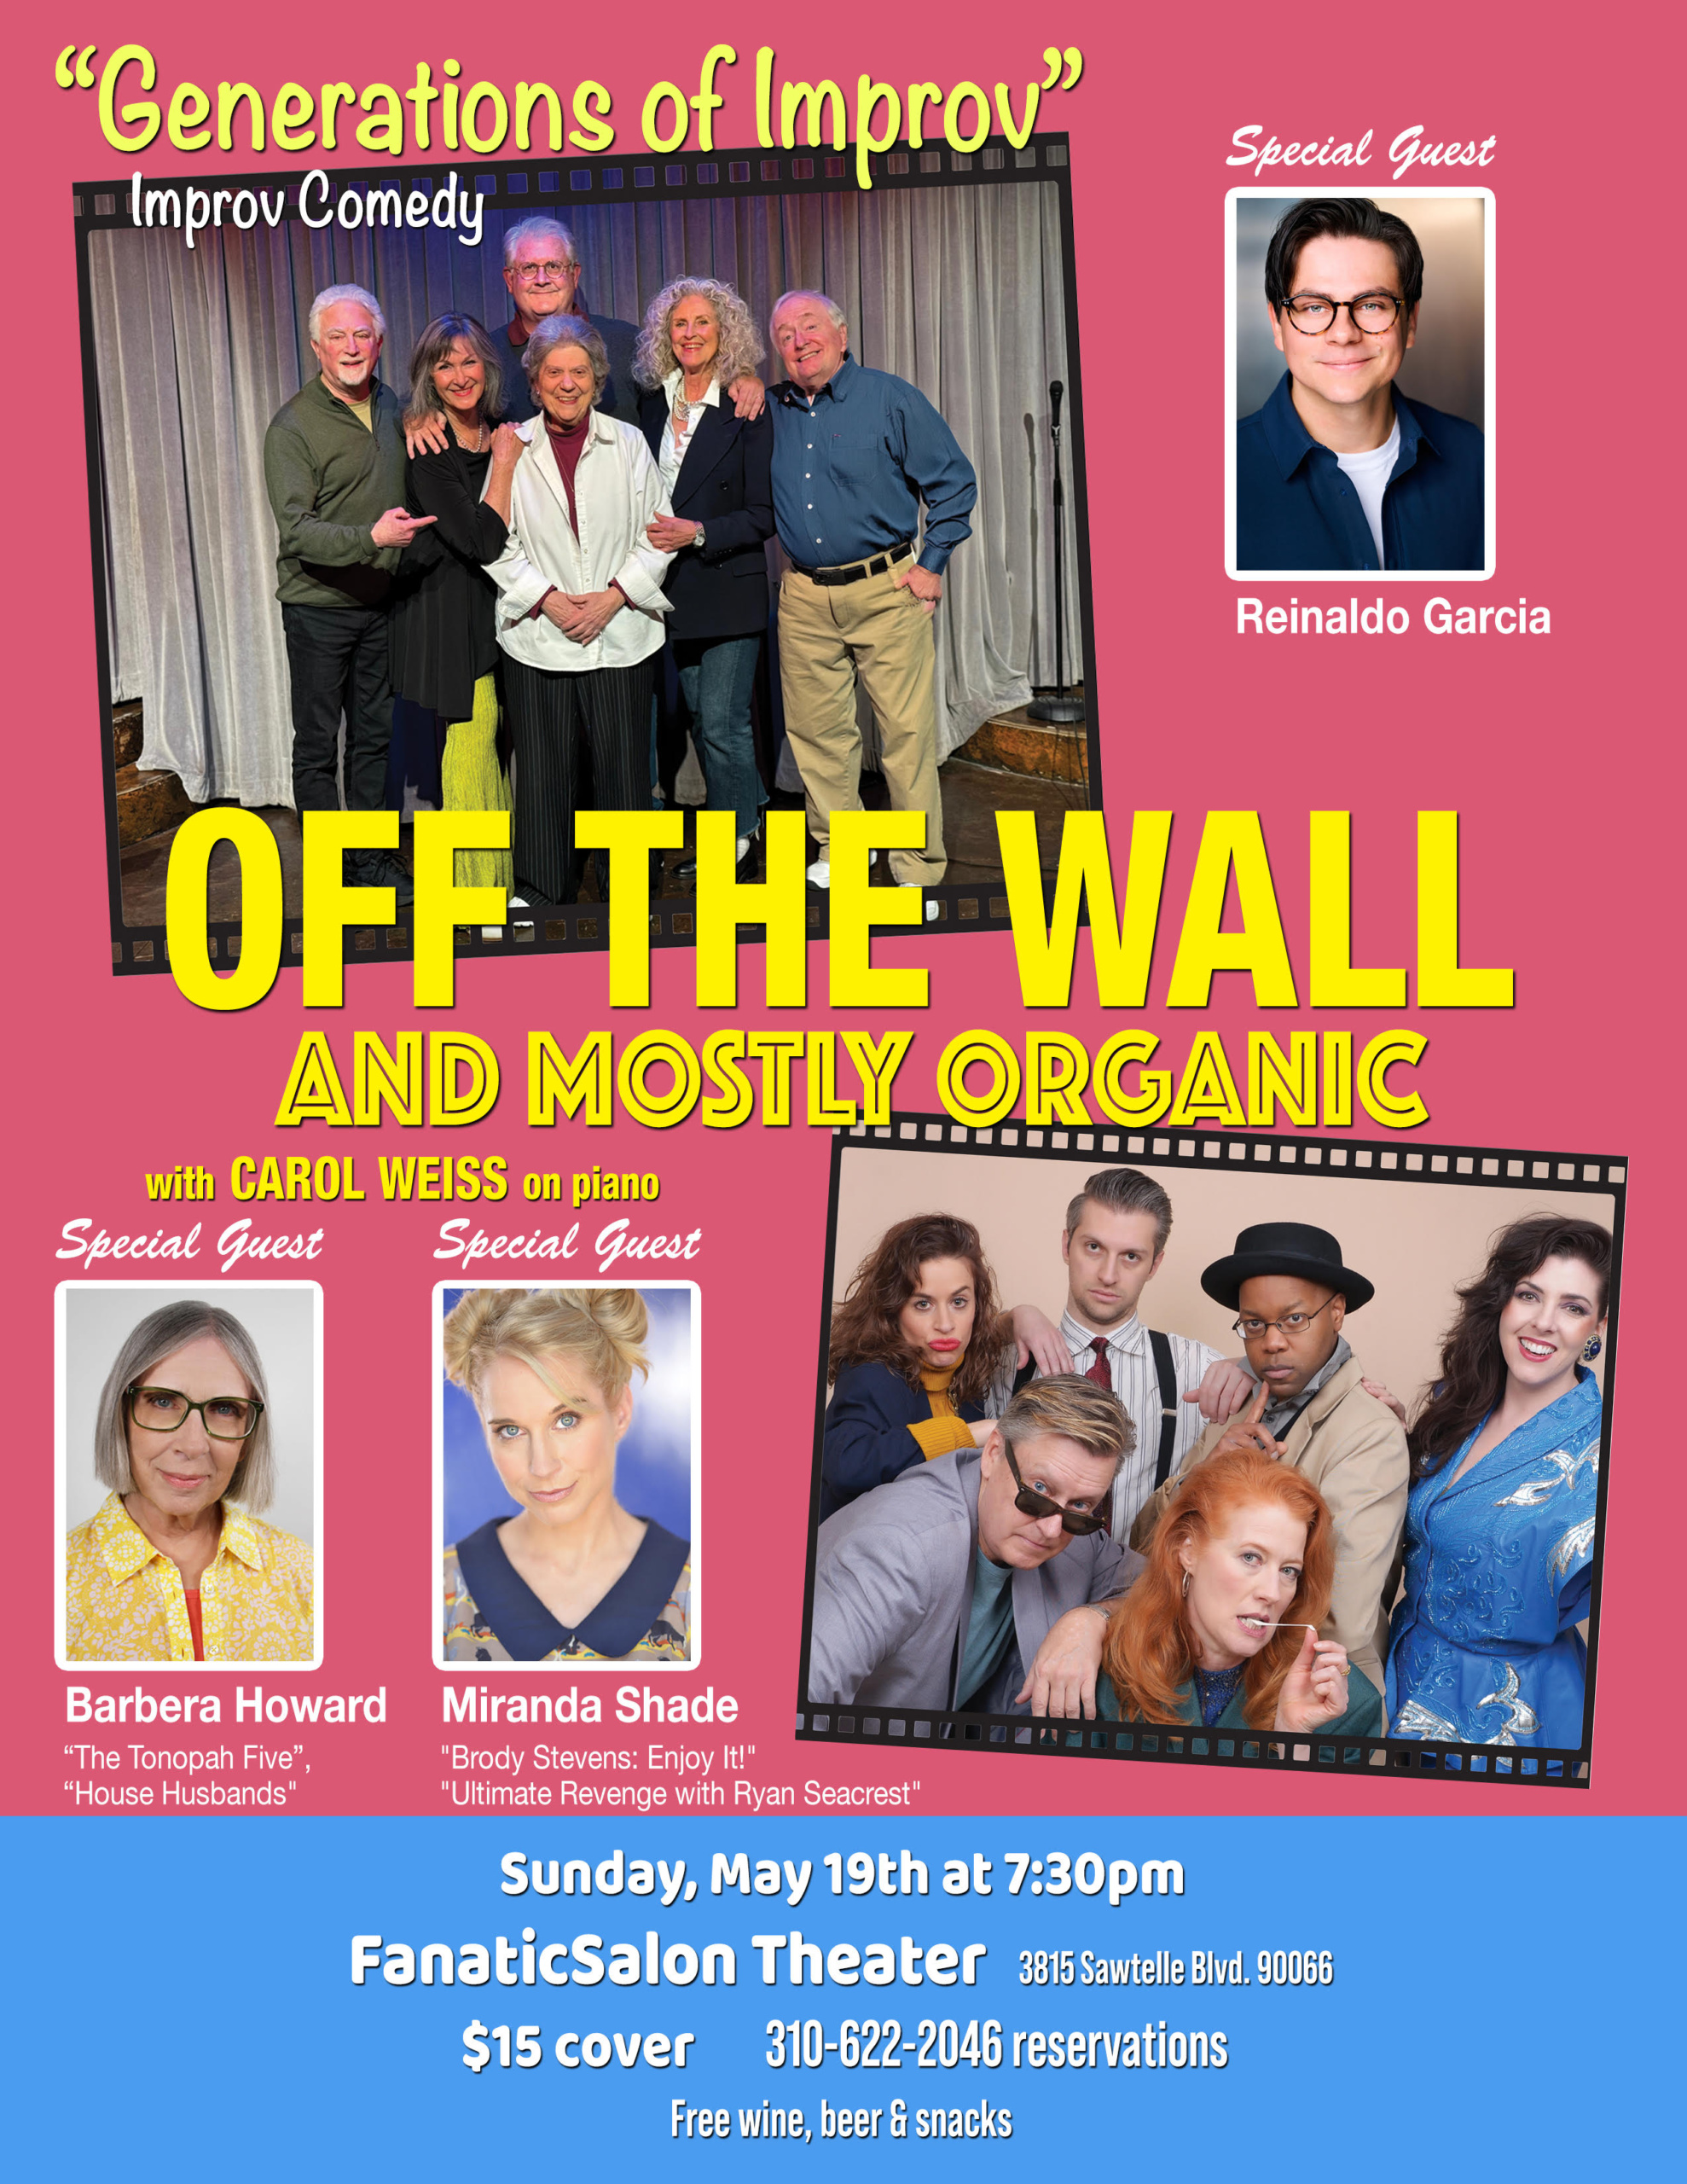 off the wall with mostly organic, fanatic salon, culver city, improv